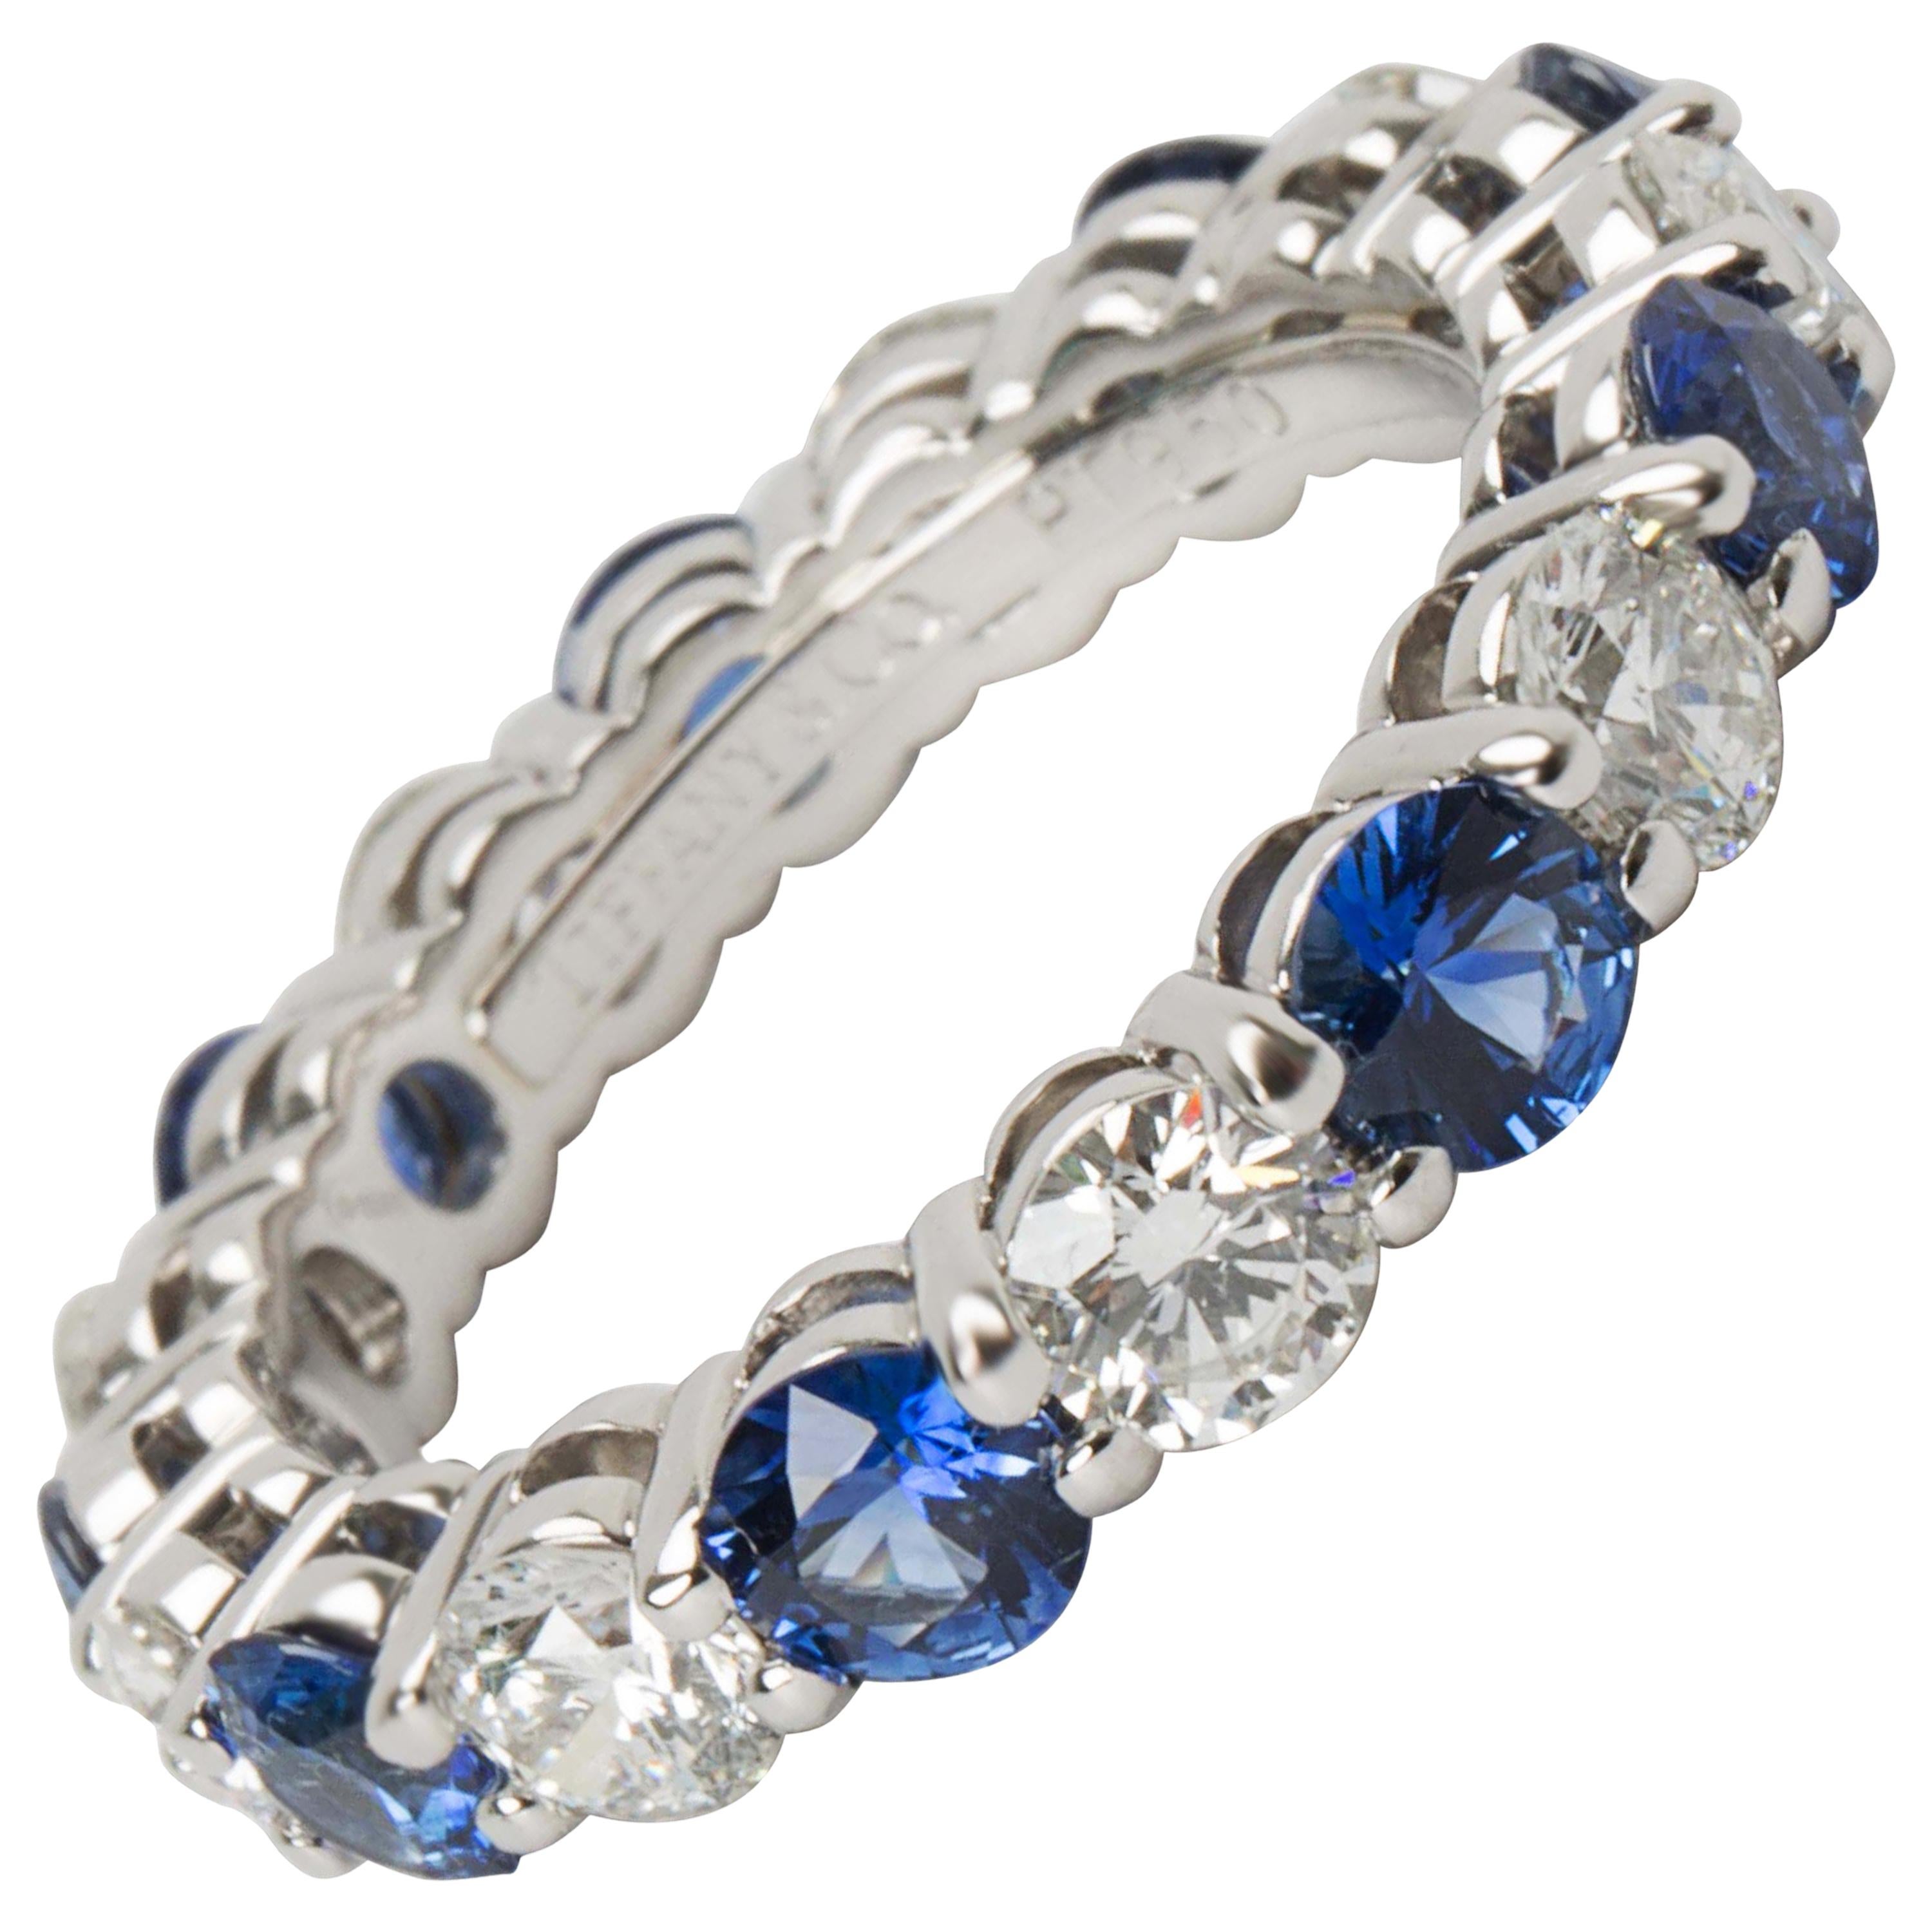 Tiffany & Co. Large Embrace Diamond and Sapphire Band in Platinum '3.24 Carat'